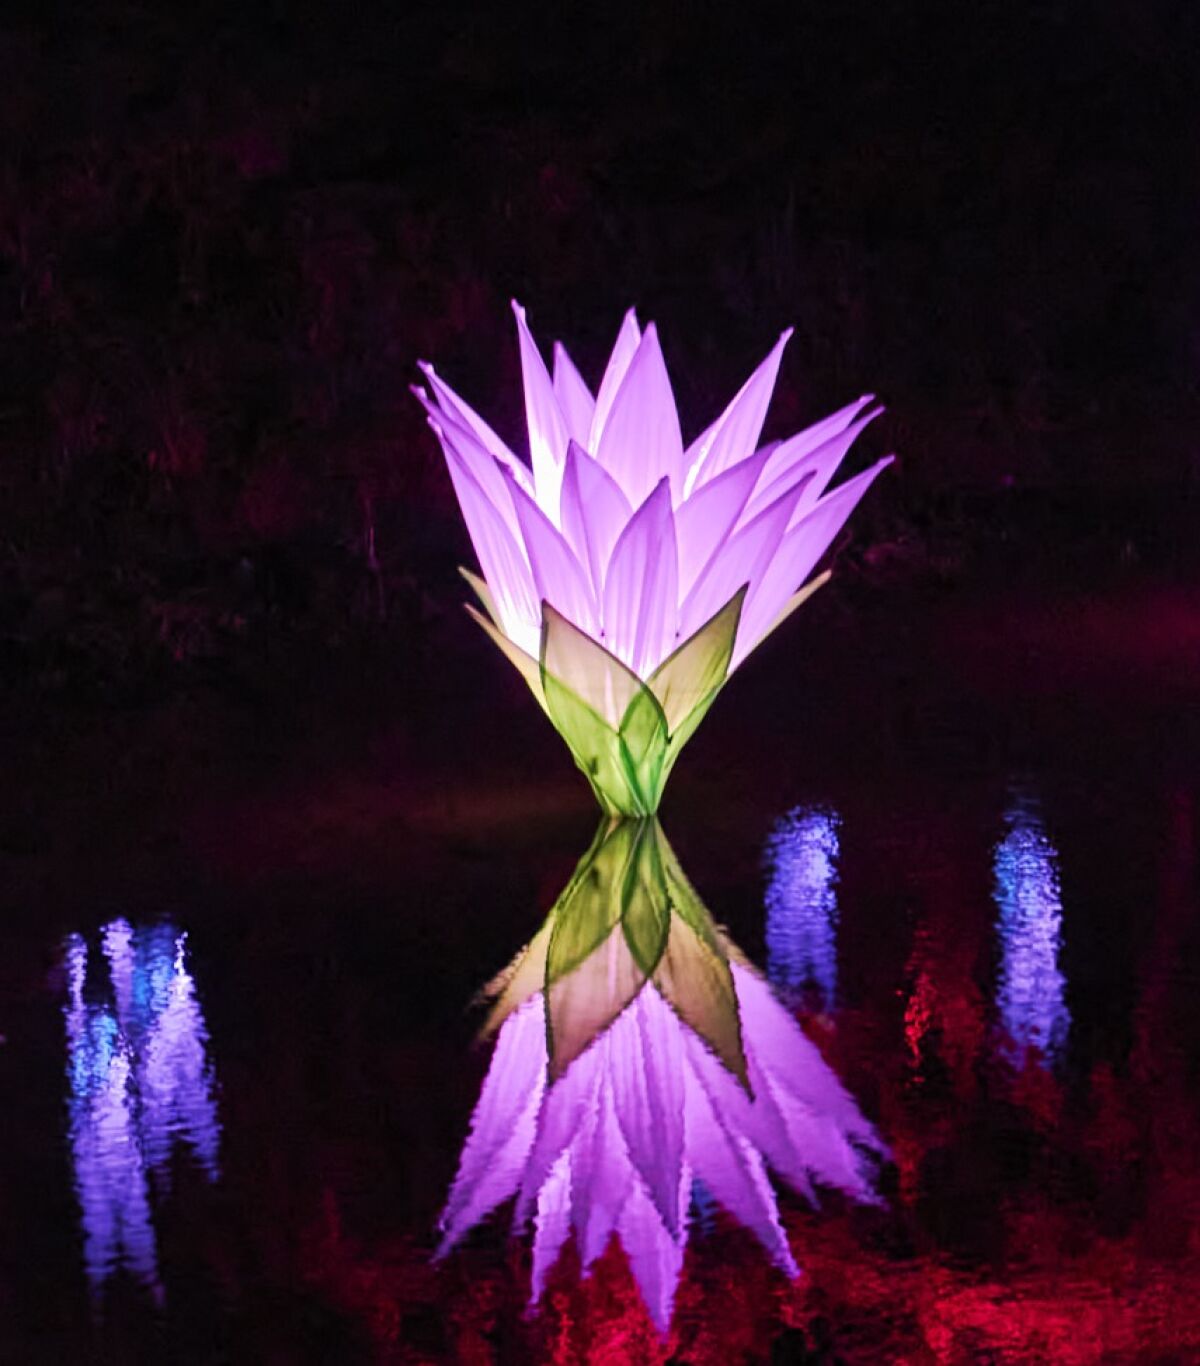 An illuminated lily sculpture is reflected in the water at Lightscape.